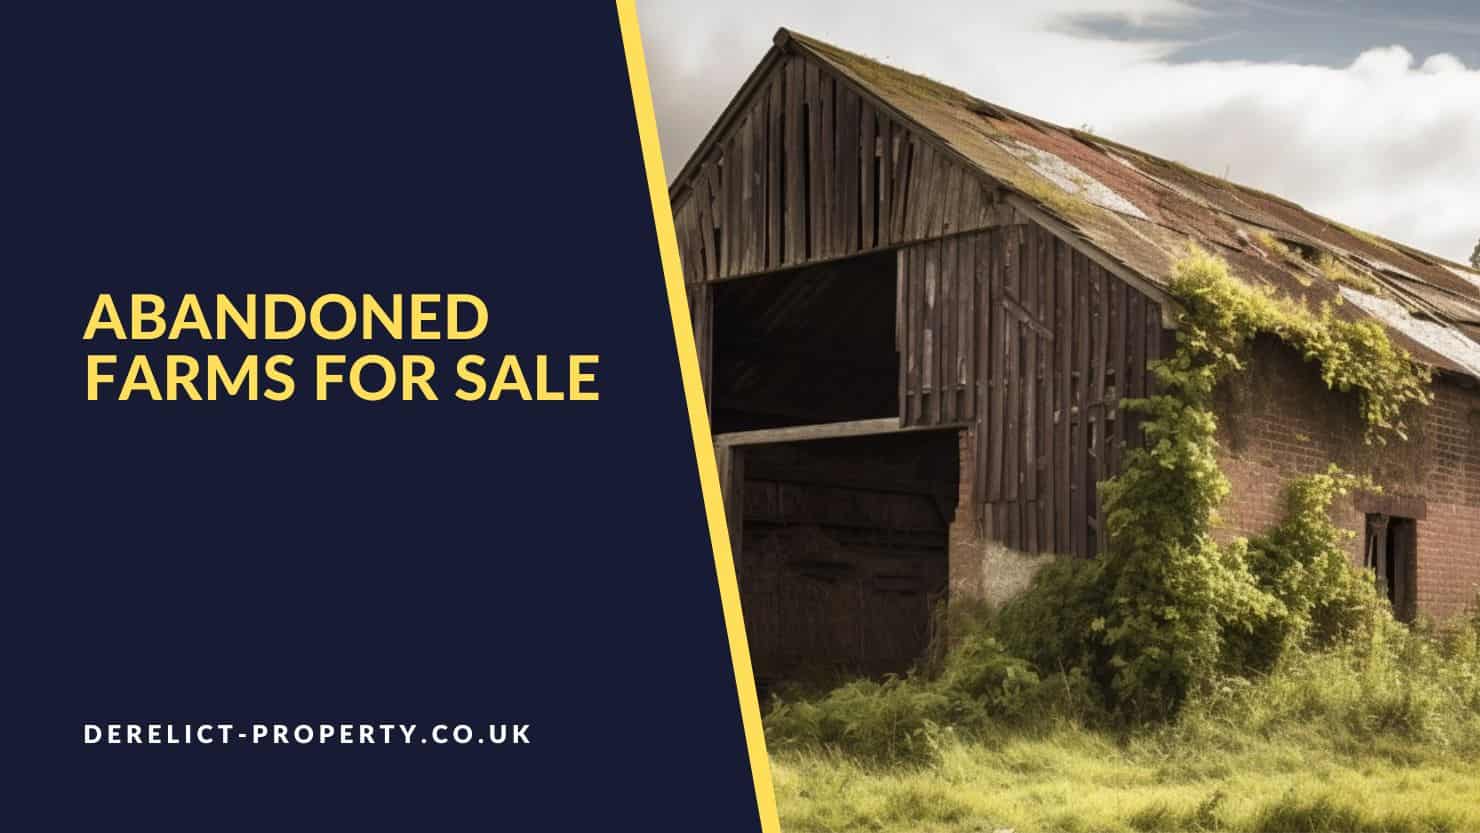 Abandoned farms for sale UK